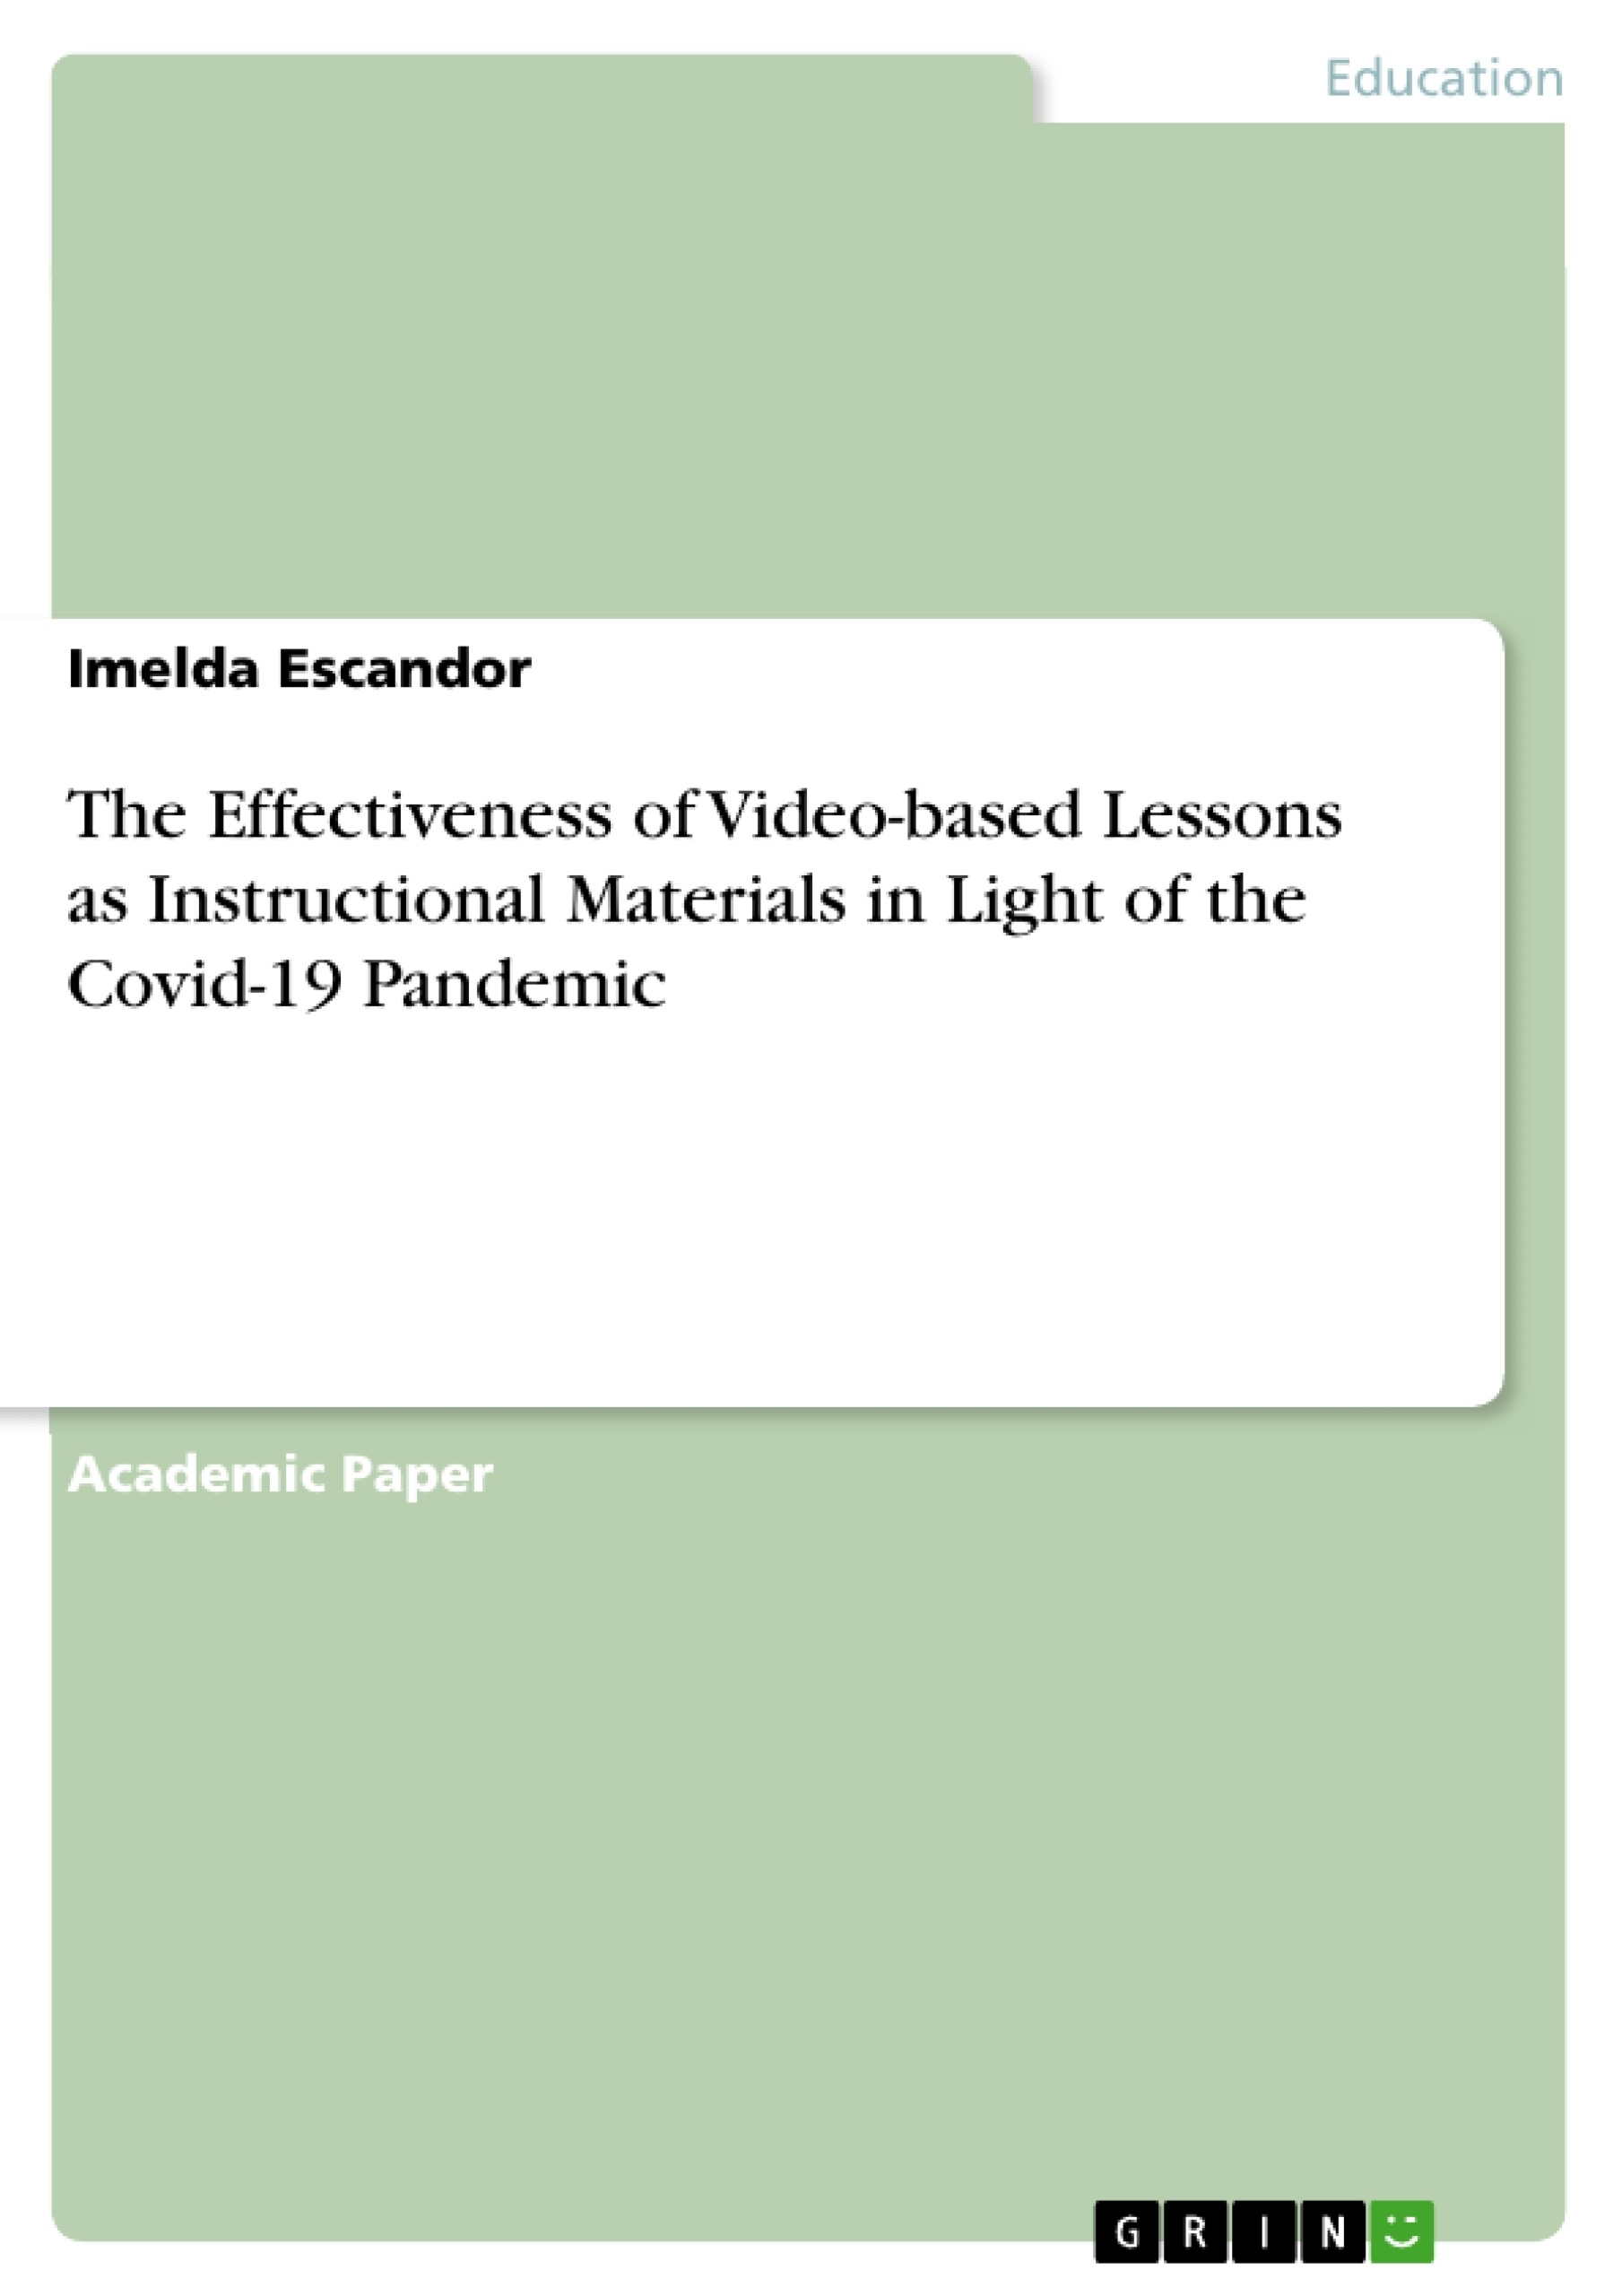 Title: The Effectiveness of Video-based Lessons as Instructional Materials in Light of the Covid-19 Pandemic